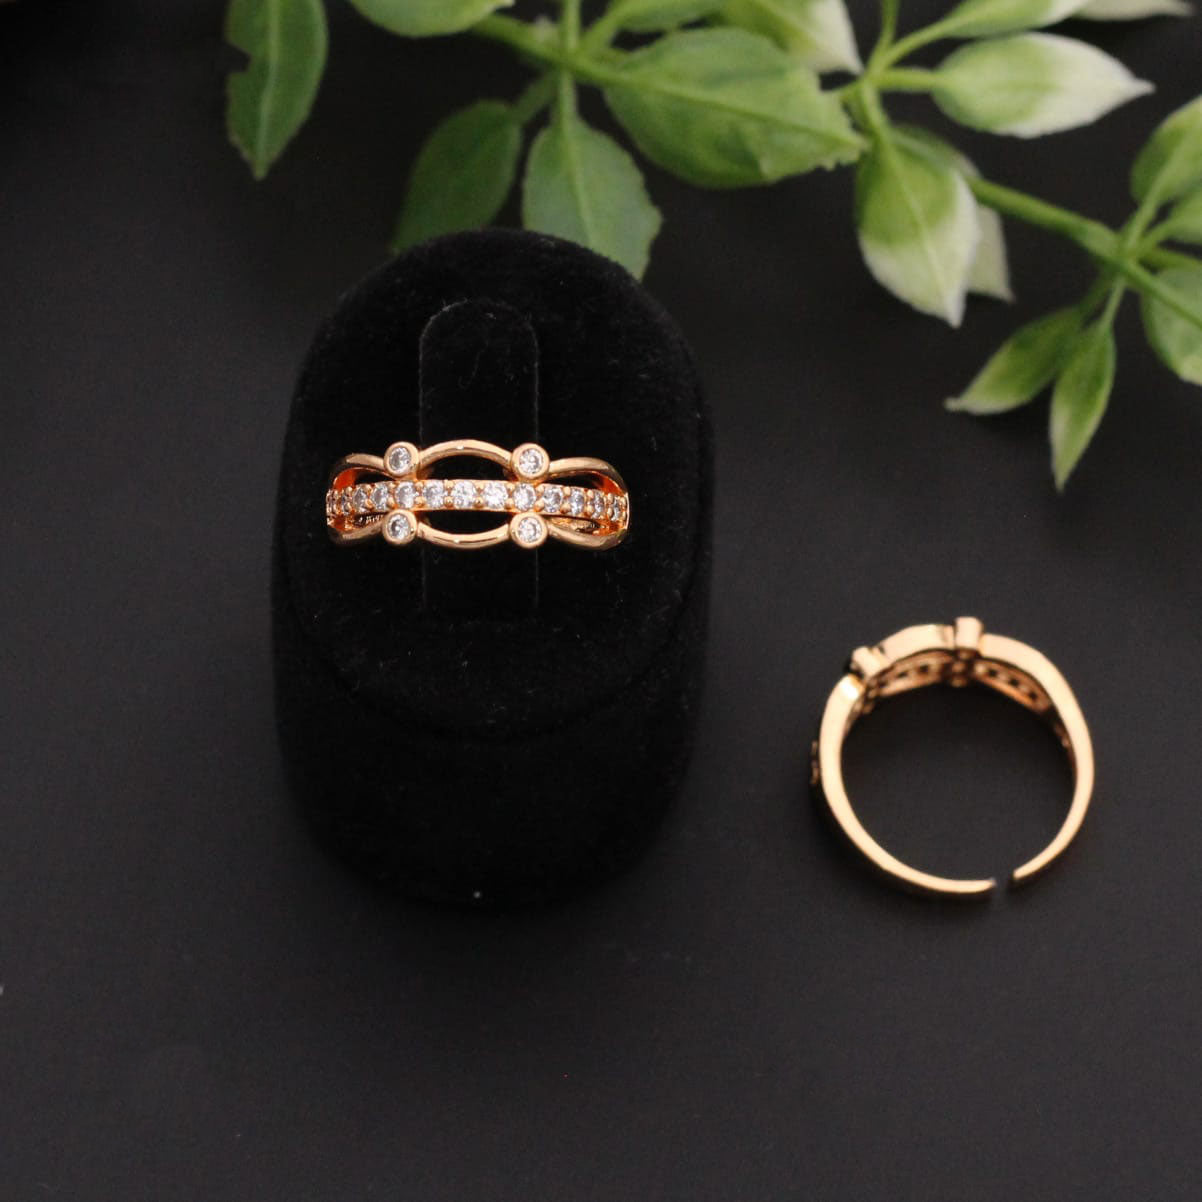 Buy Women's Stylish Pear Rings With Bright Stones By Bindhani